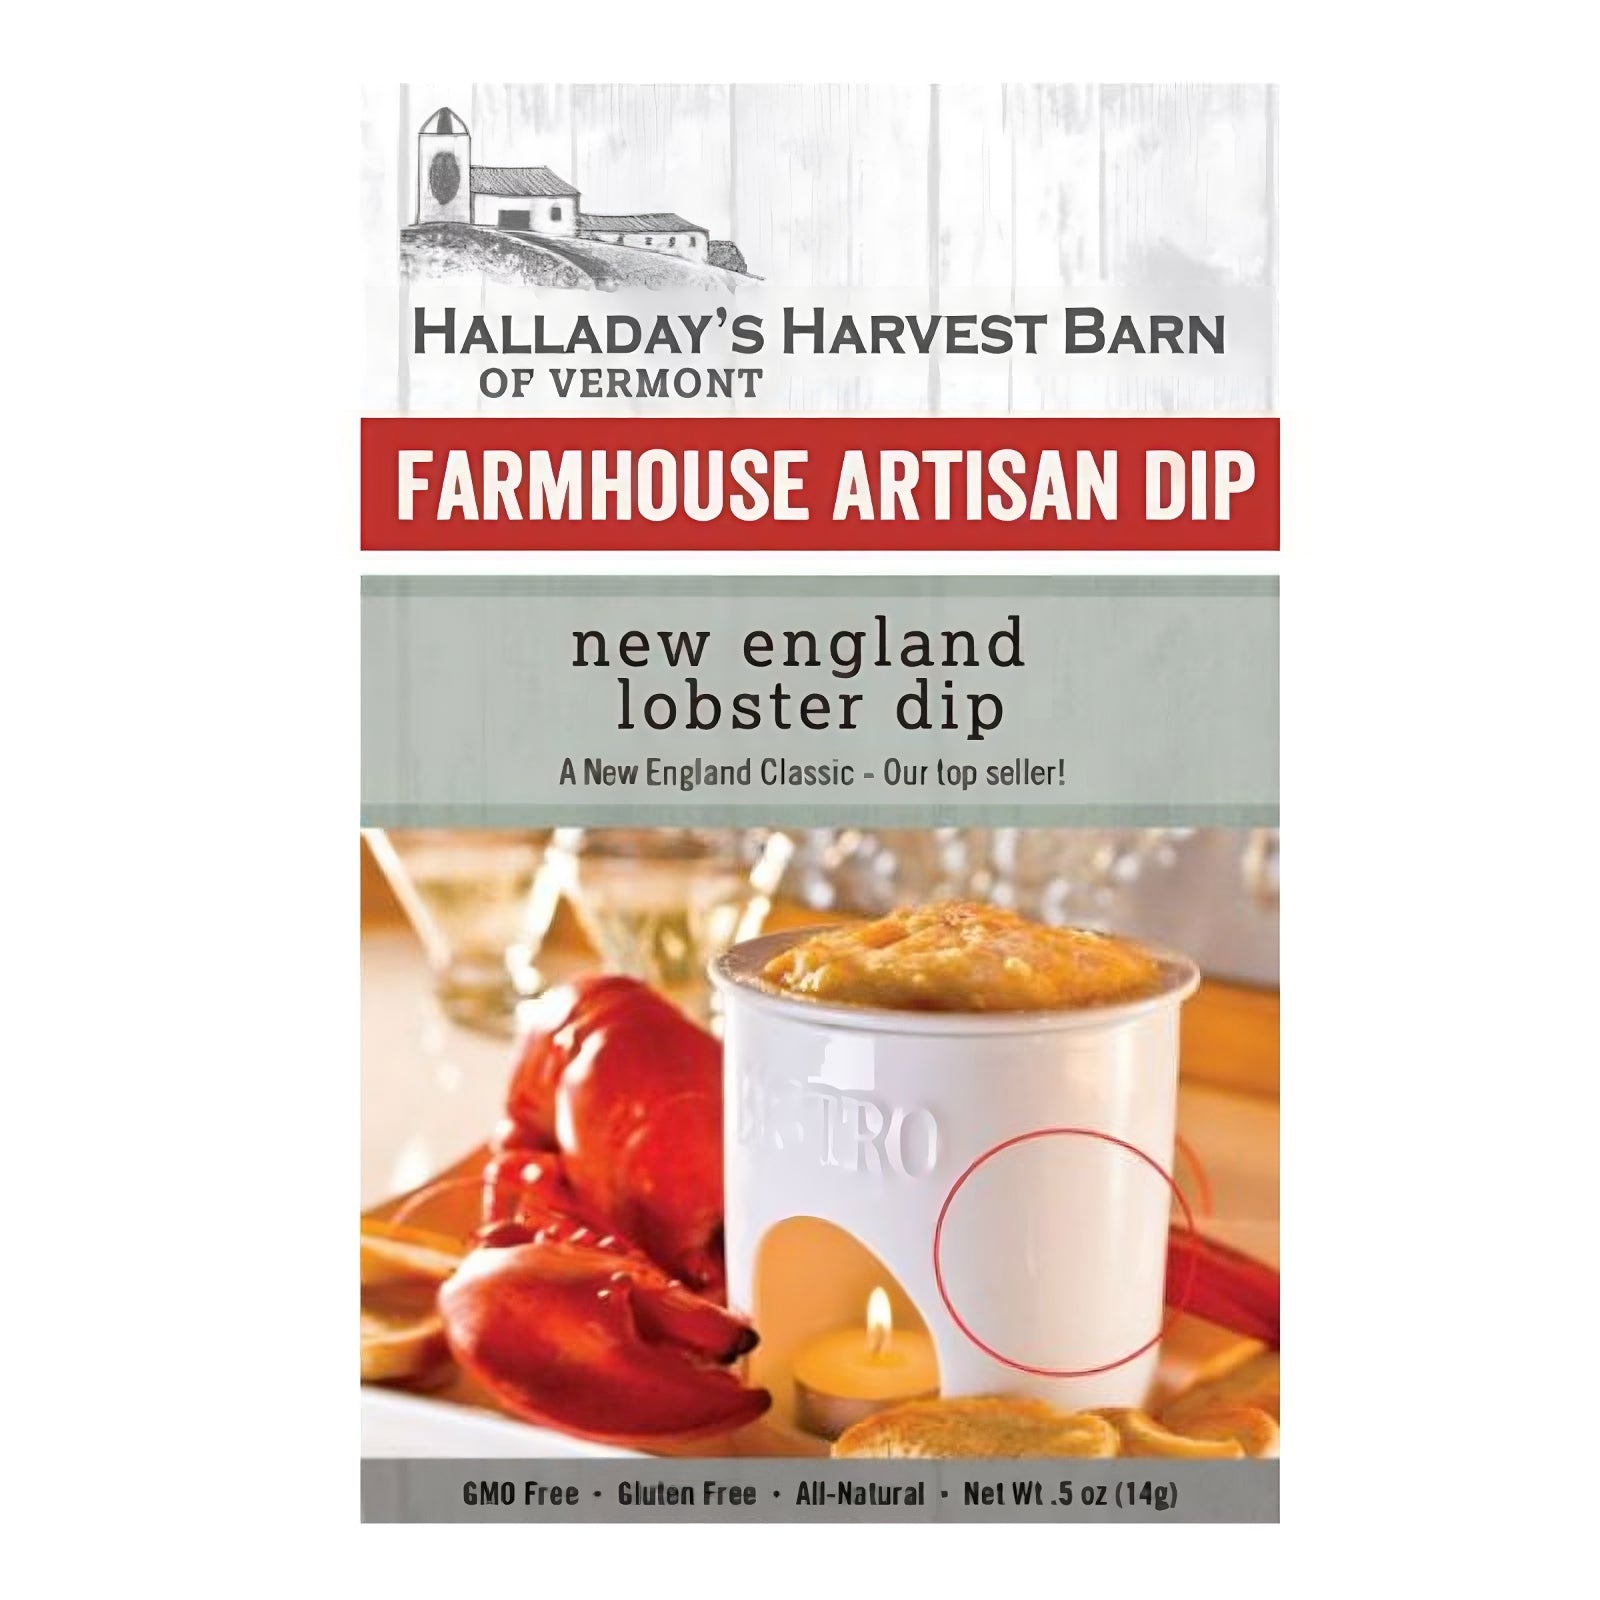 With Halladay's Lobster Dip Mix, your next get together will be a hit.